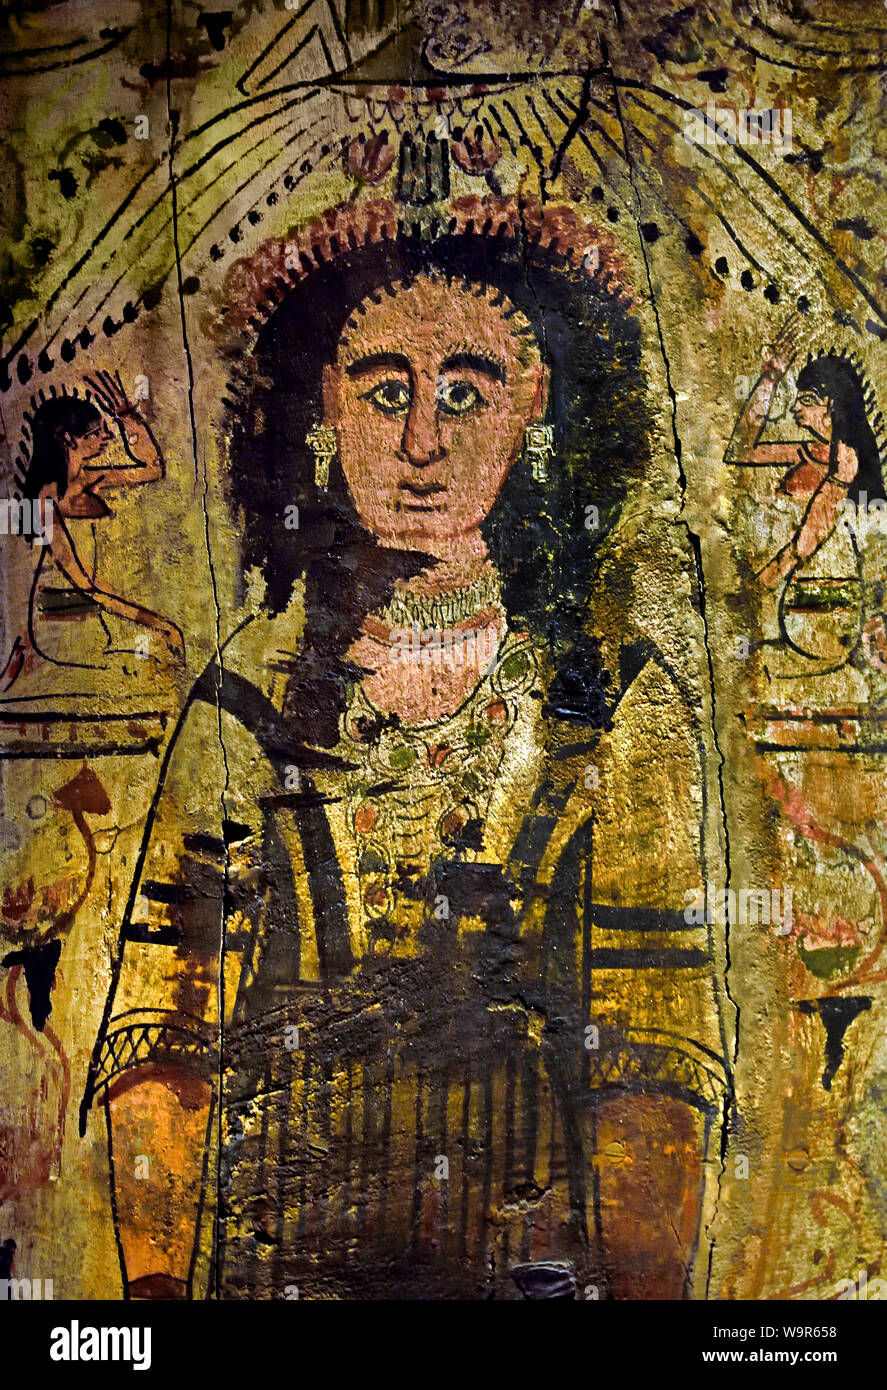 Bottom of the coffin of Chelidonia early 3rd century AD Thebes  (Tamarind wood painted with tempera Thebes tombs) Egypt Egyptian , In Roman times, the ancient Thebes no longer exists: the city of Diospolis Magna (Louqsor) extends on the east bank of the Nile while the west bank (Memnonia) now depends on the city of Hermonthis (Armant ). The long-established funerary tradition for the Egyptian elite is better maintained here than elsewhere, by the care given to mummification, the skilful integration of ancient iconography and the use of cartonnage techniques, especially in stuccoed linen. Stock Photo